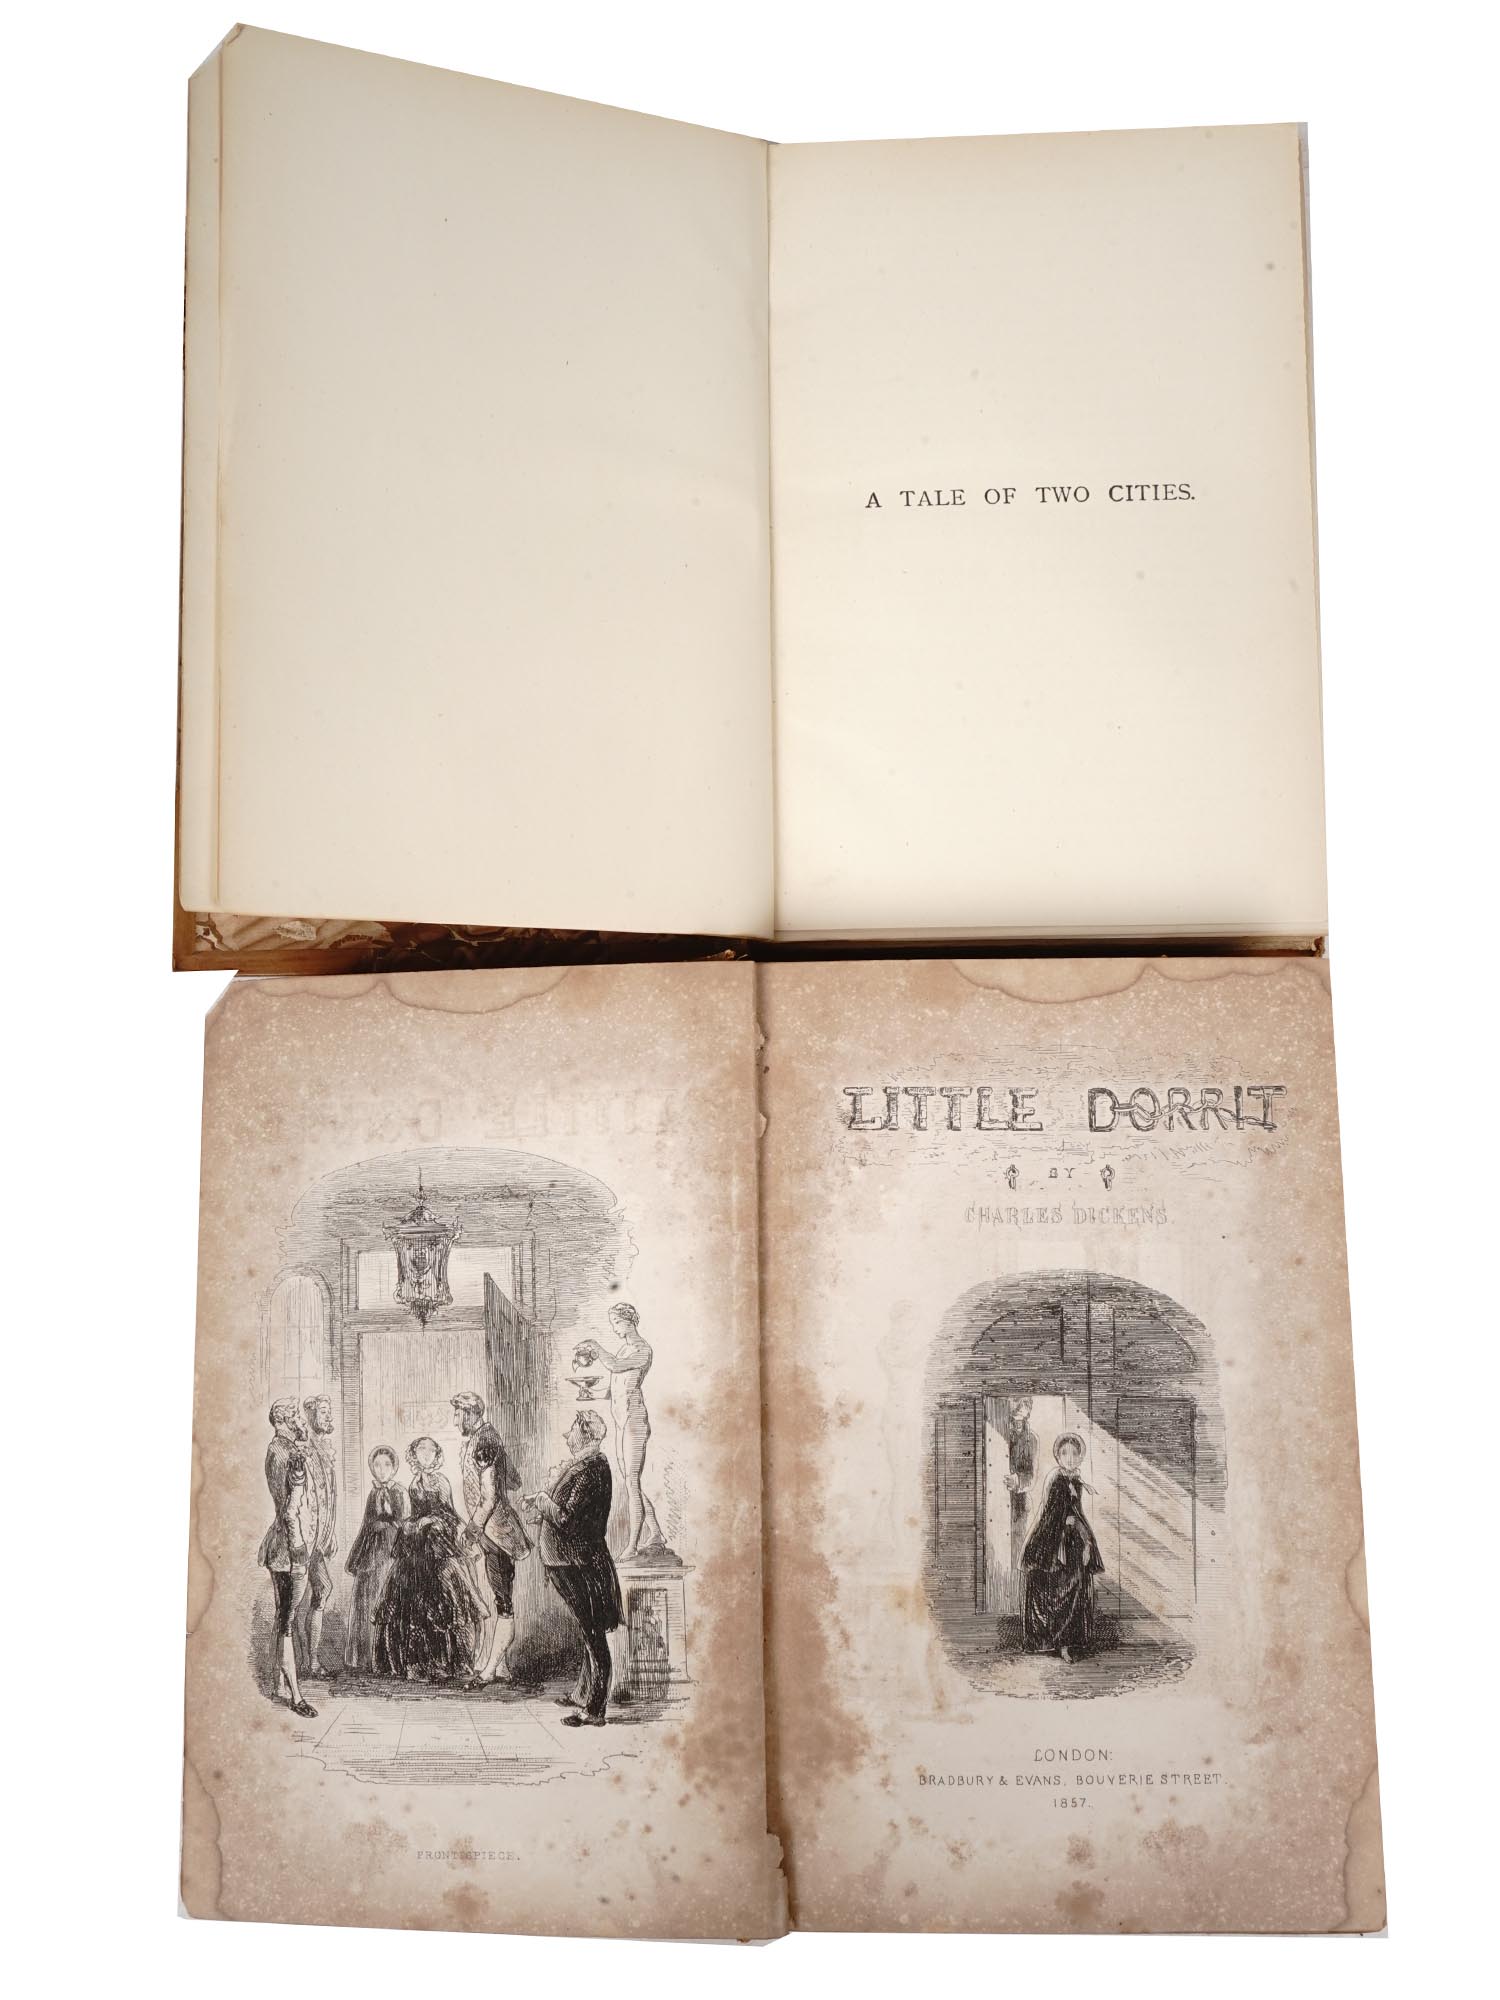 ANTIQUE CHARLES DICKENS BOOK EDITIONS PIC-7